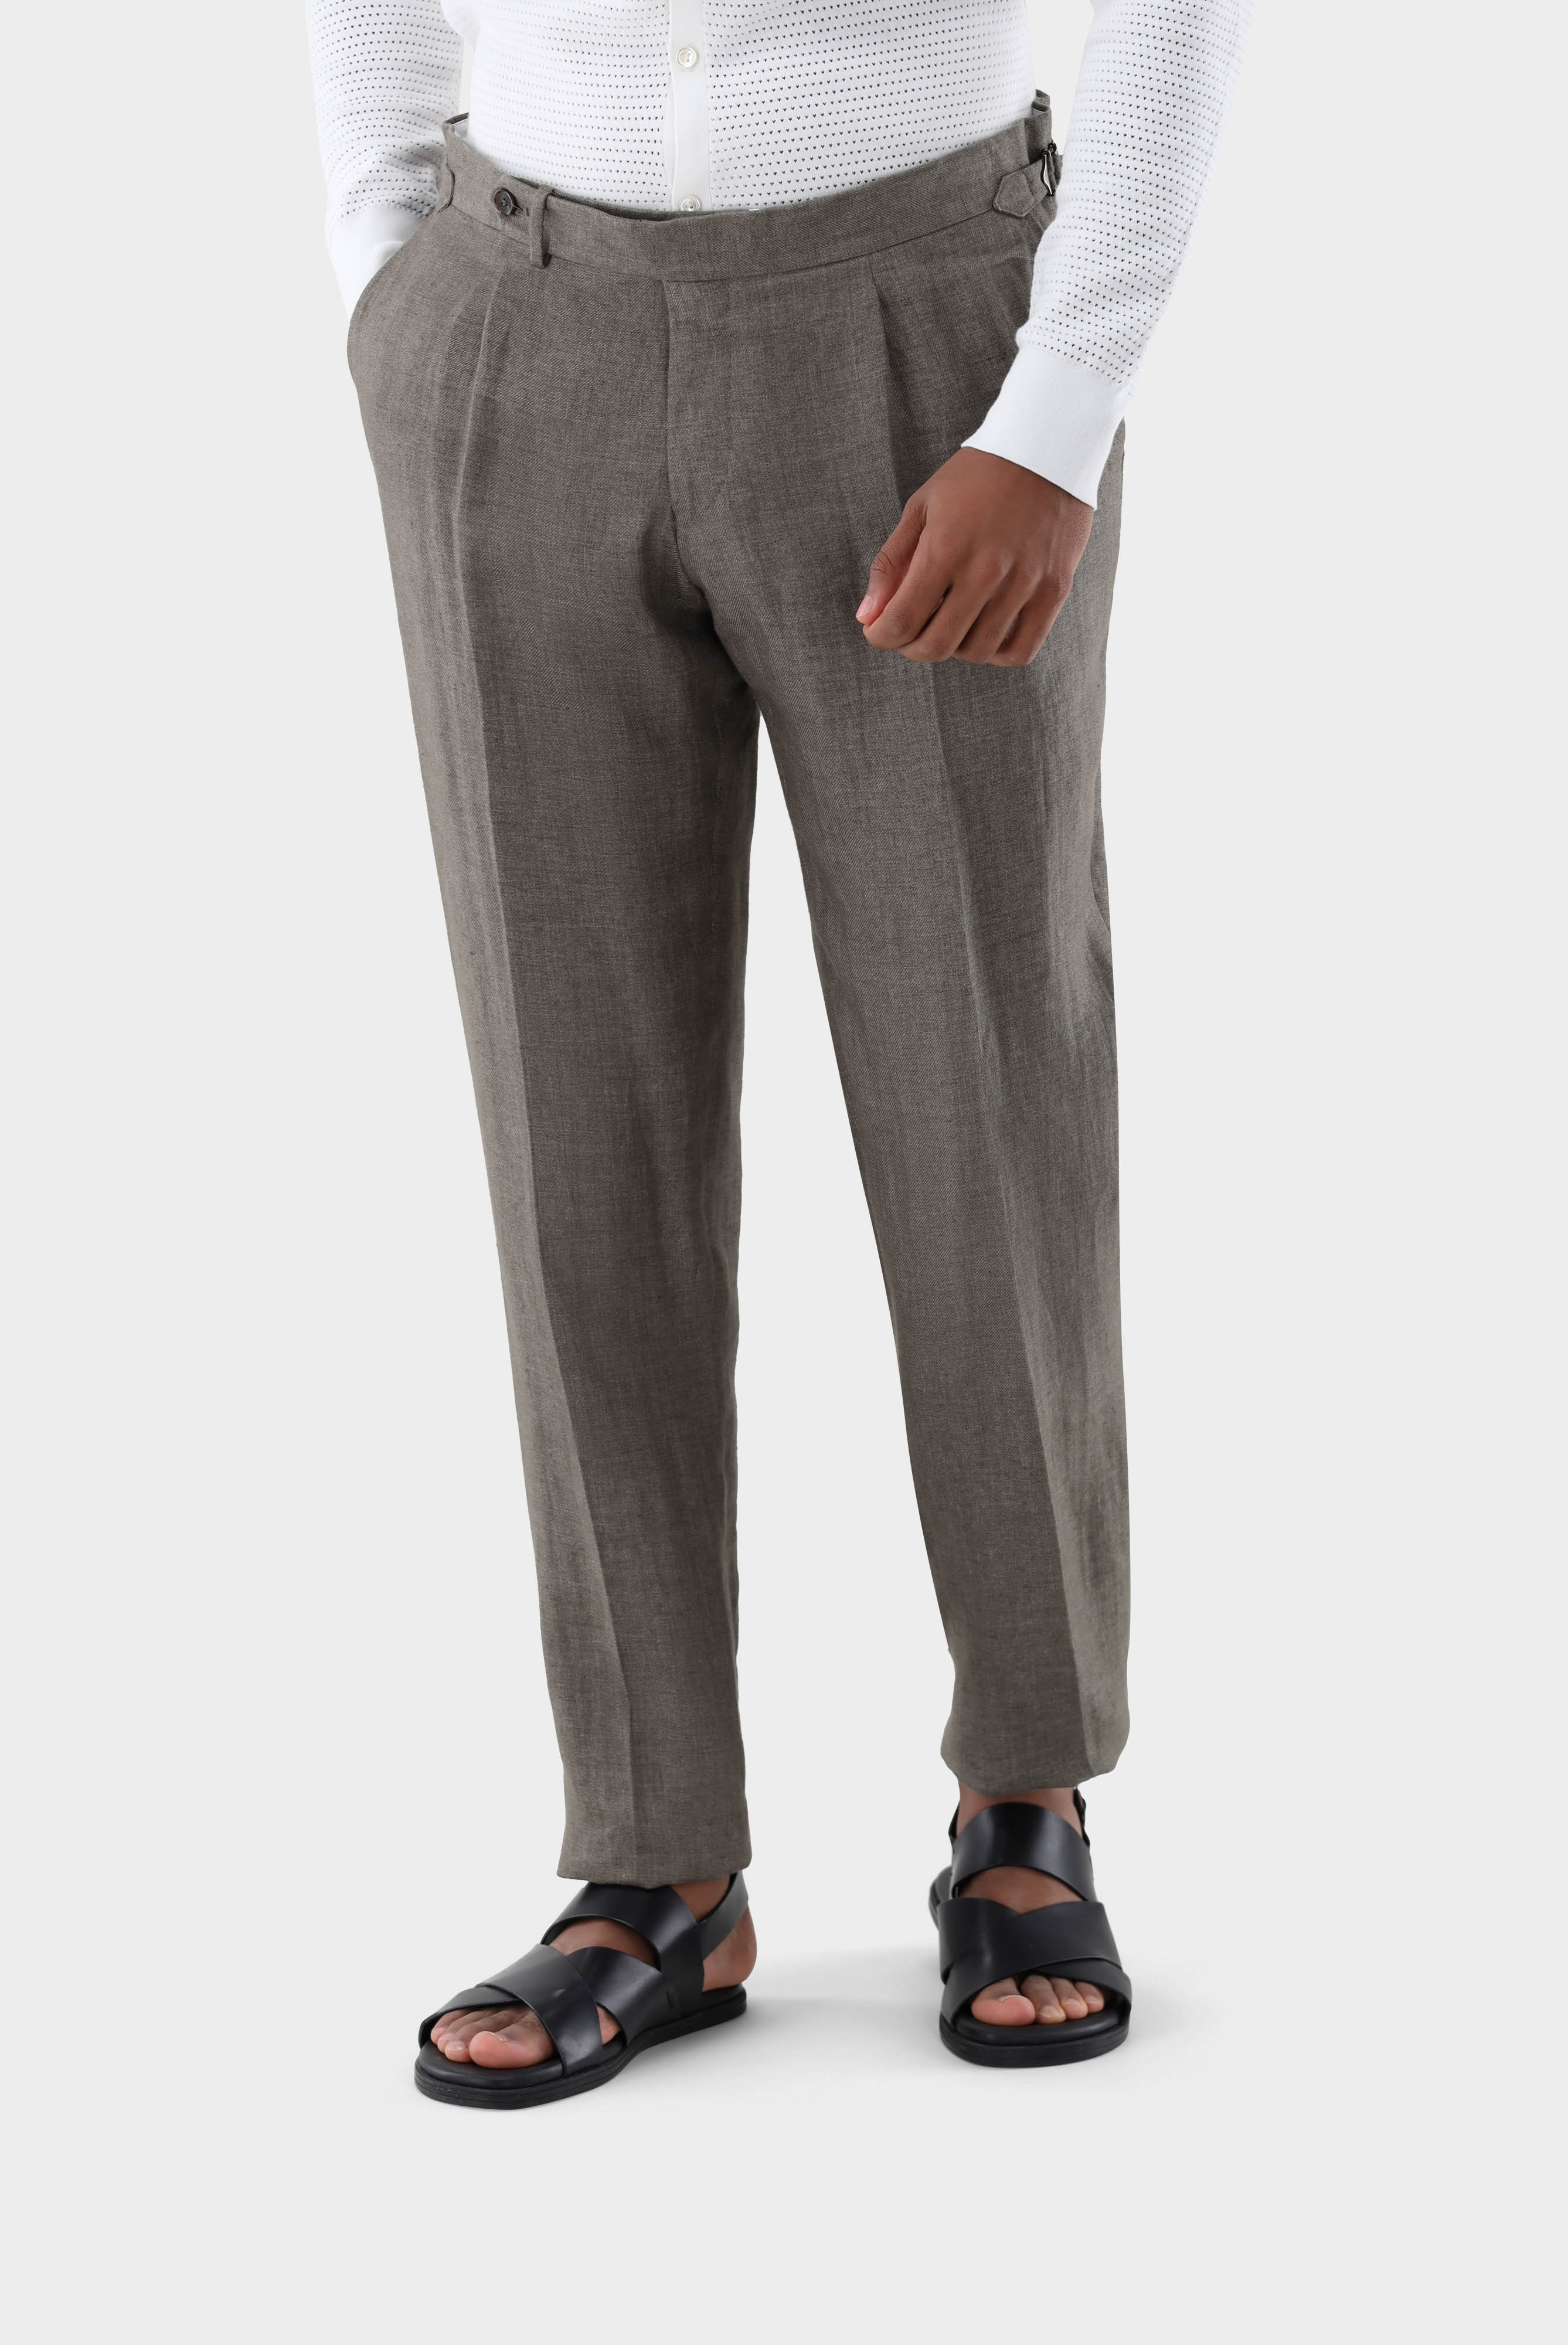 Jeans & Trousers+Linen trousers with pleats+20.7814.15.H55027.169.46